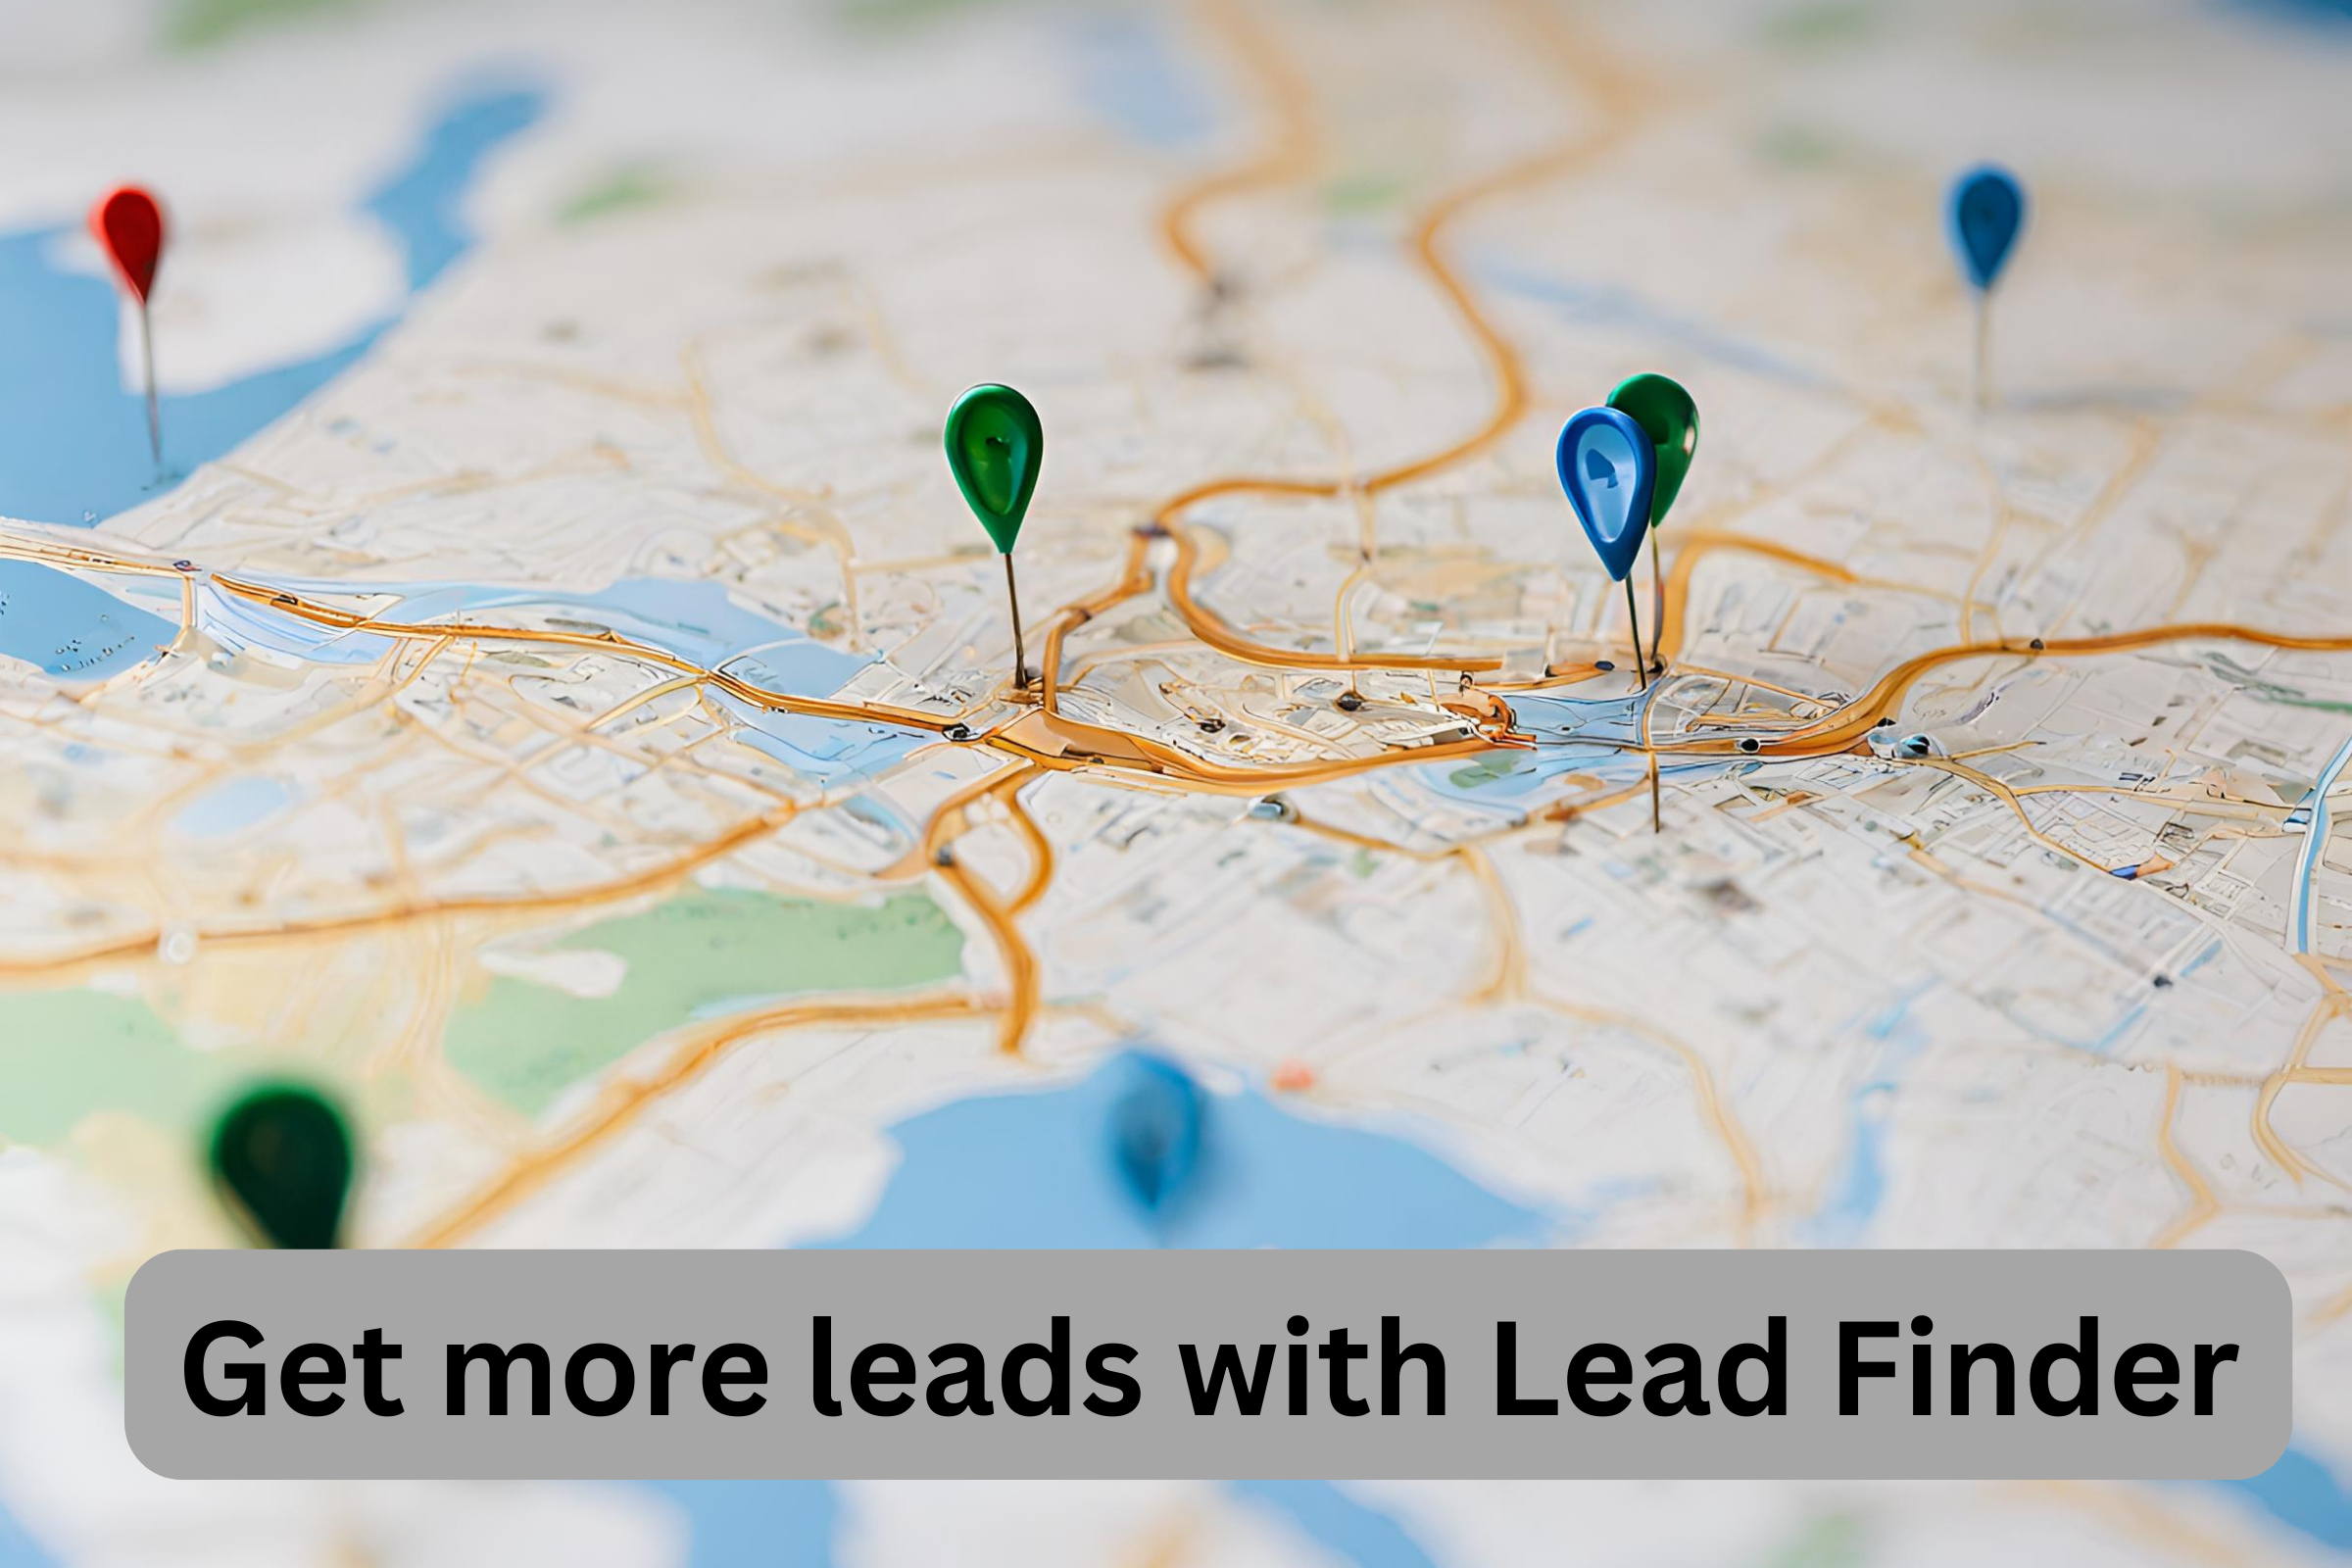 Lead Finder Features